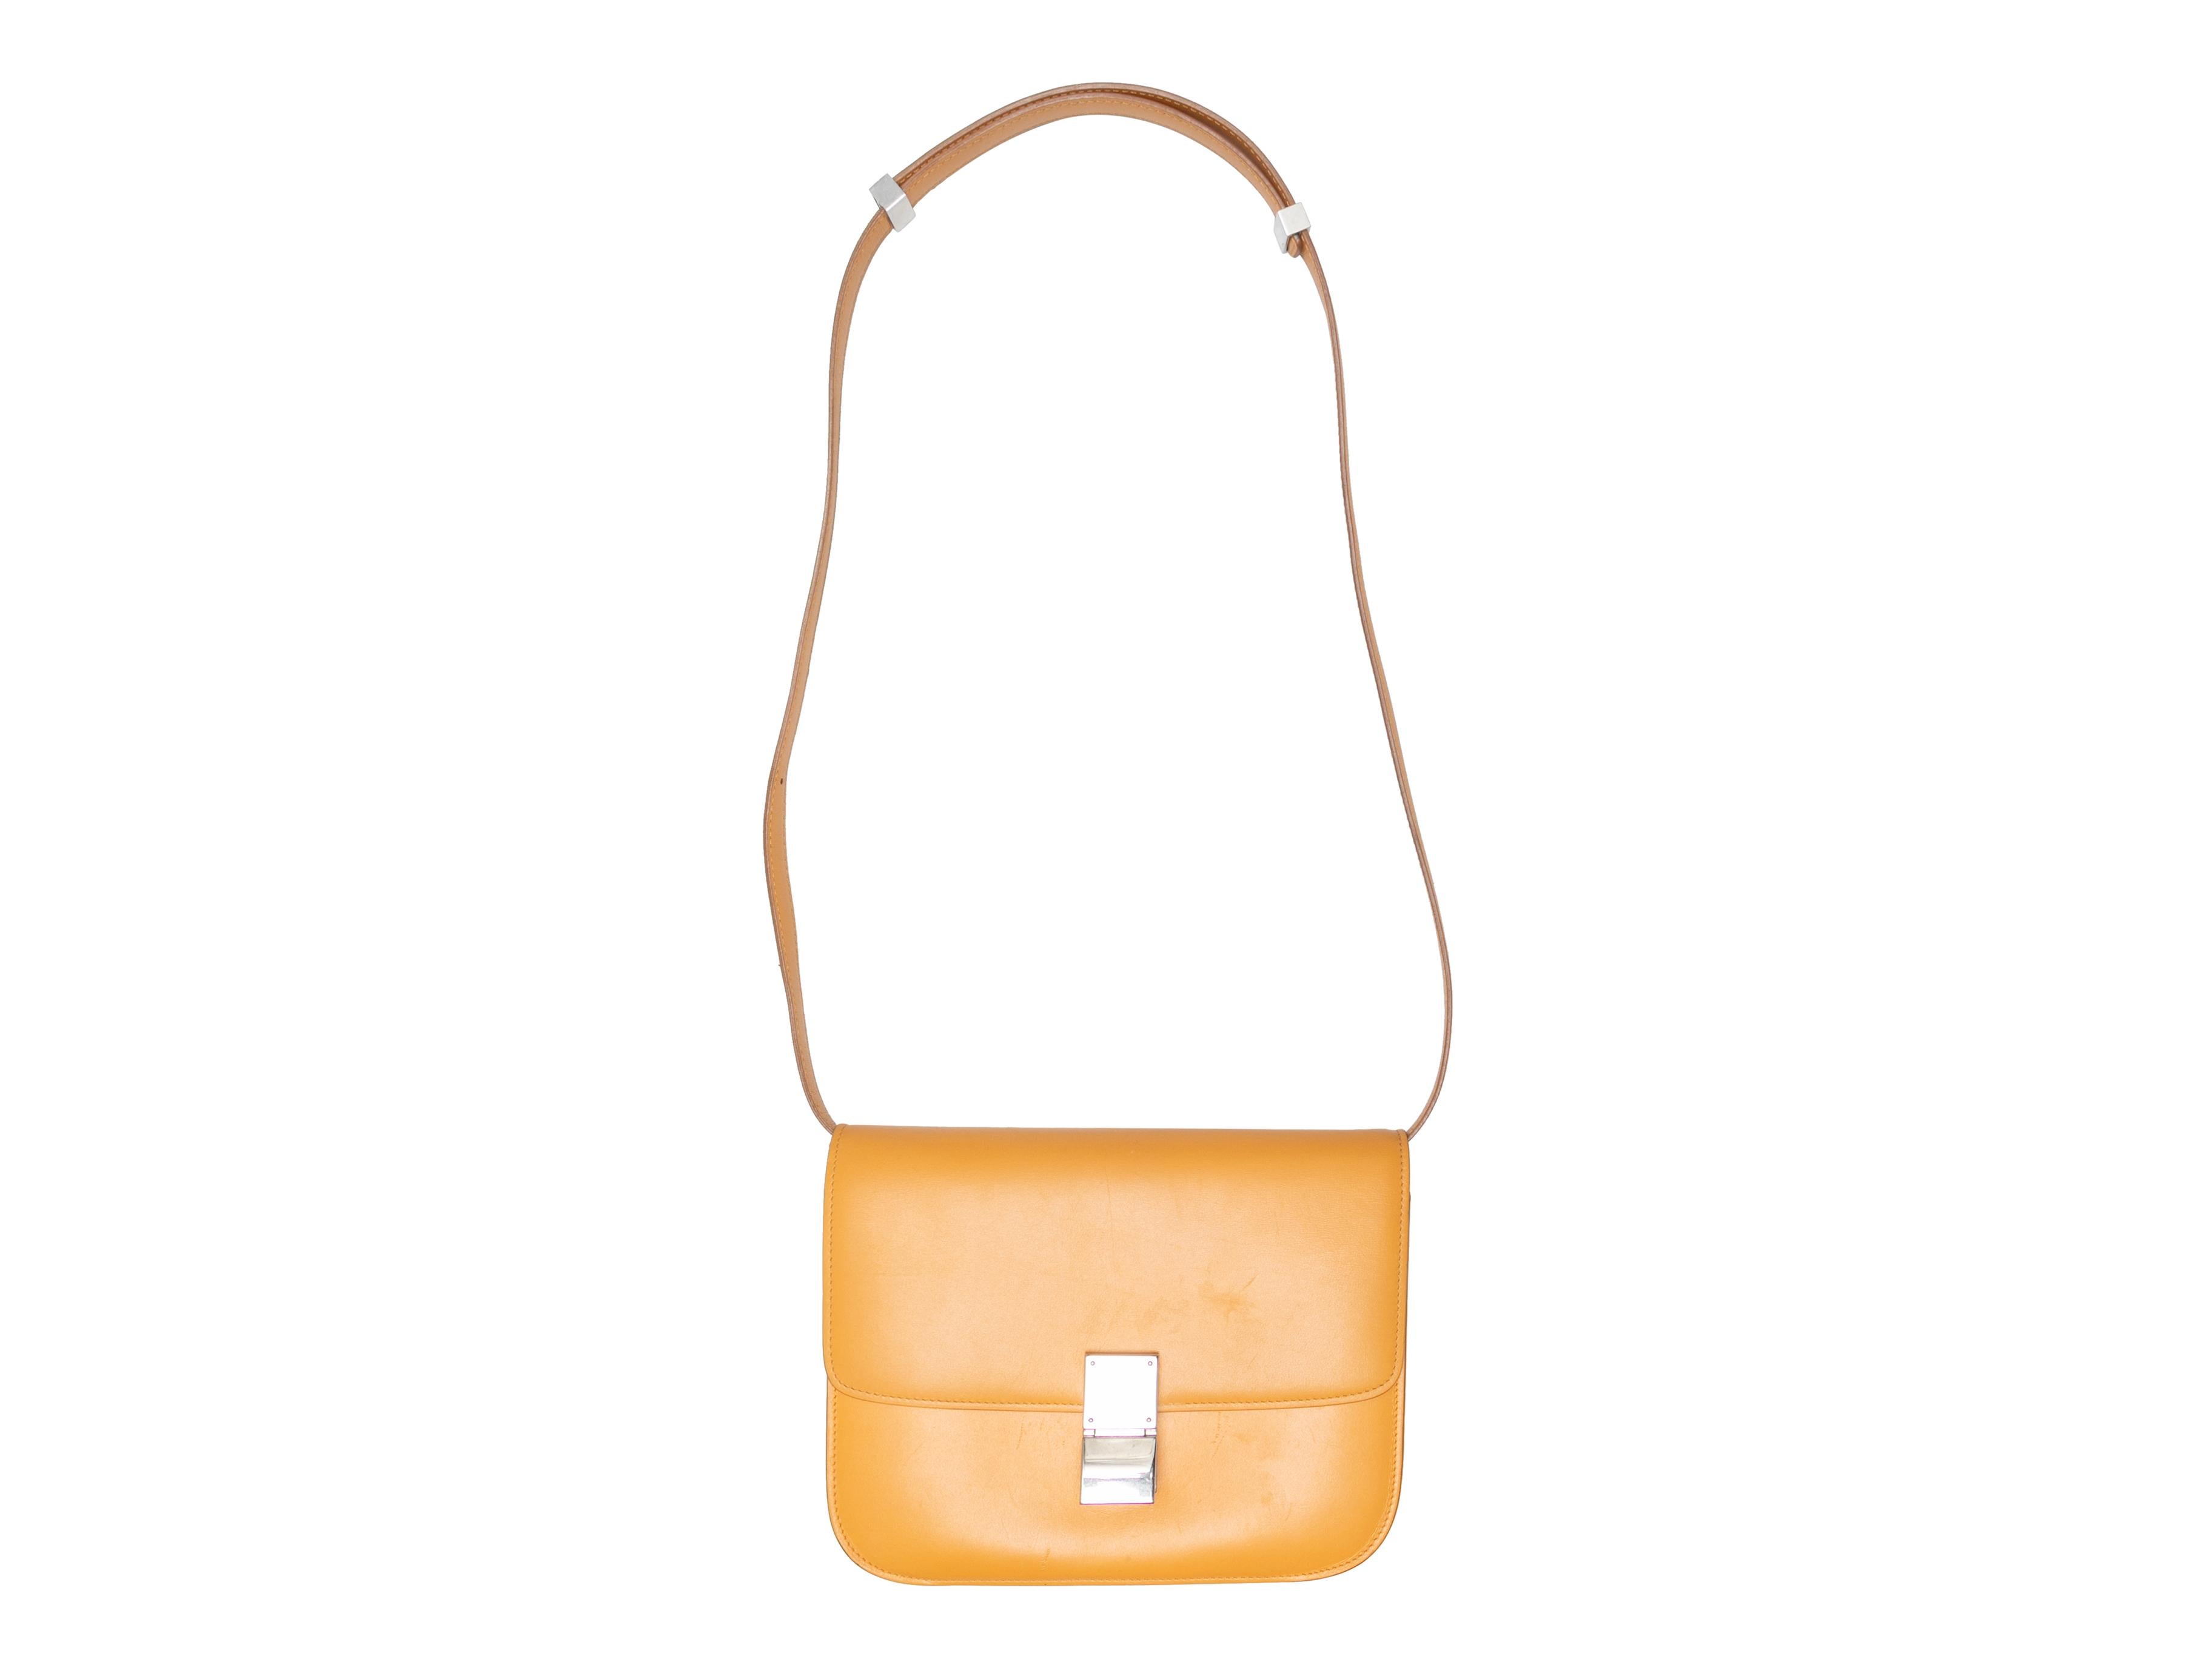  Mustard Celine Teen Classic Leather Crossbody. The Teen Classic Crossbody features a leather body, silver-tone hardware, a single flat shoulder strap, and a front clasp closure. 9.25